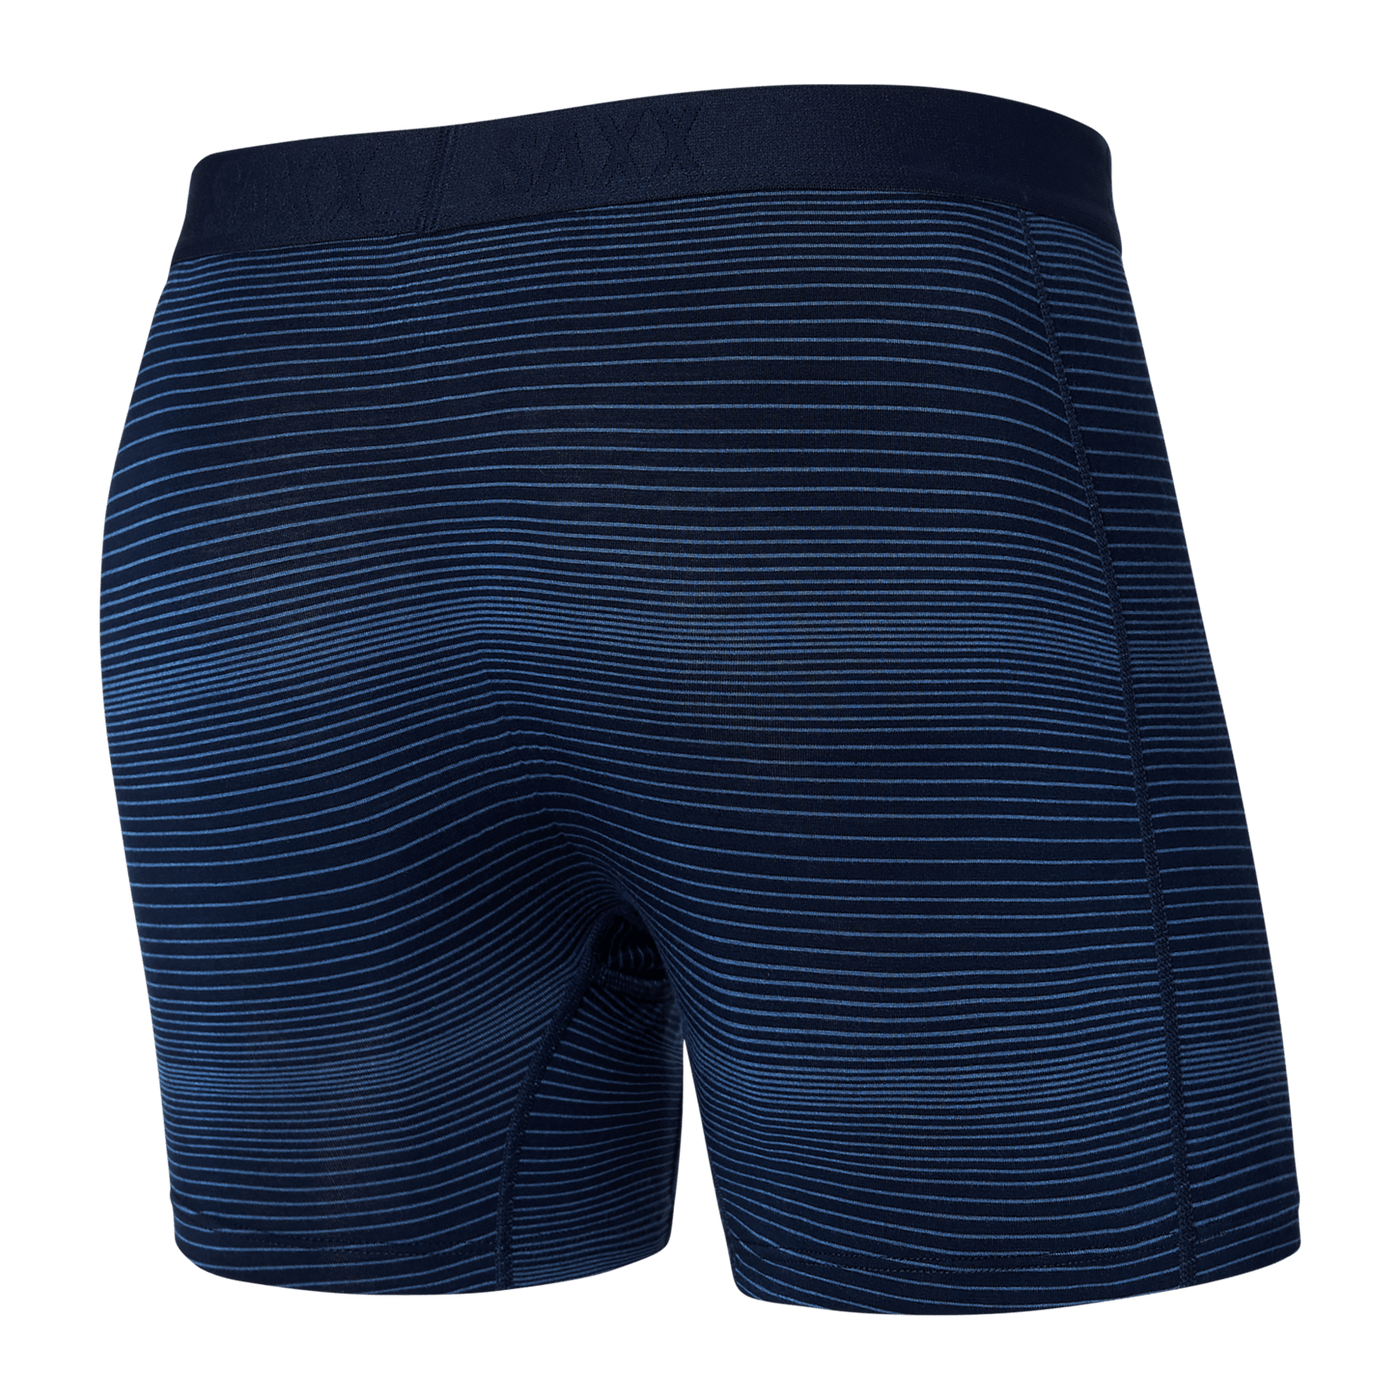 Saxx Vibe Boxers - Variegated Stripe-Martime - The Hockey Shop Source For Sports